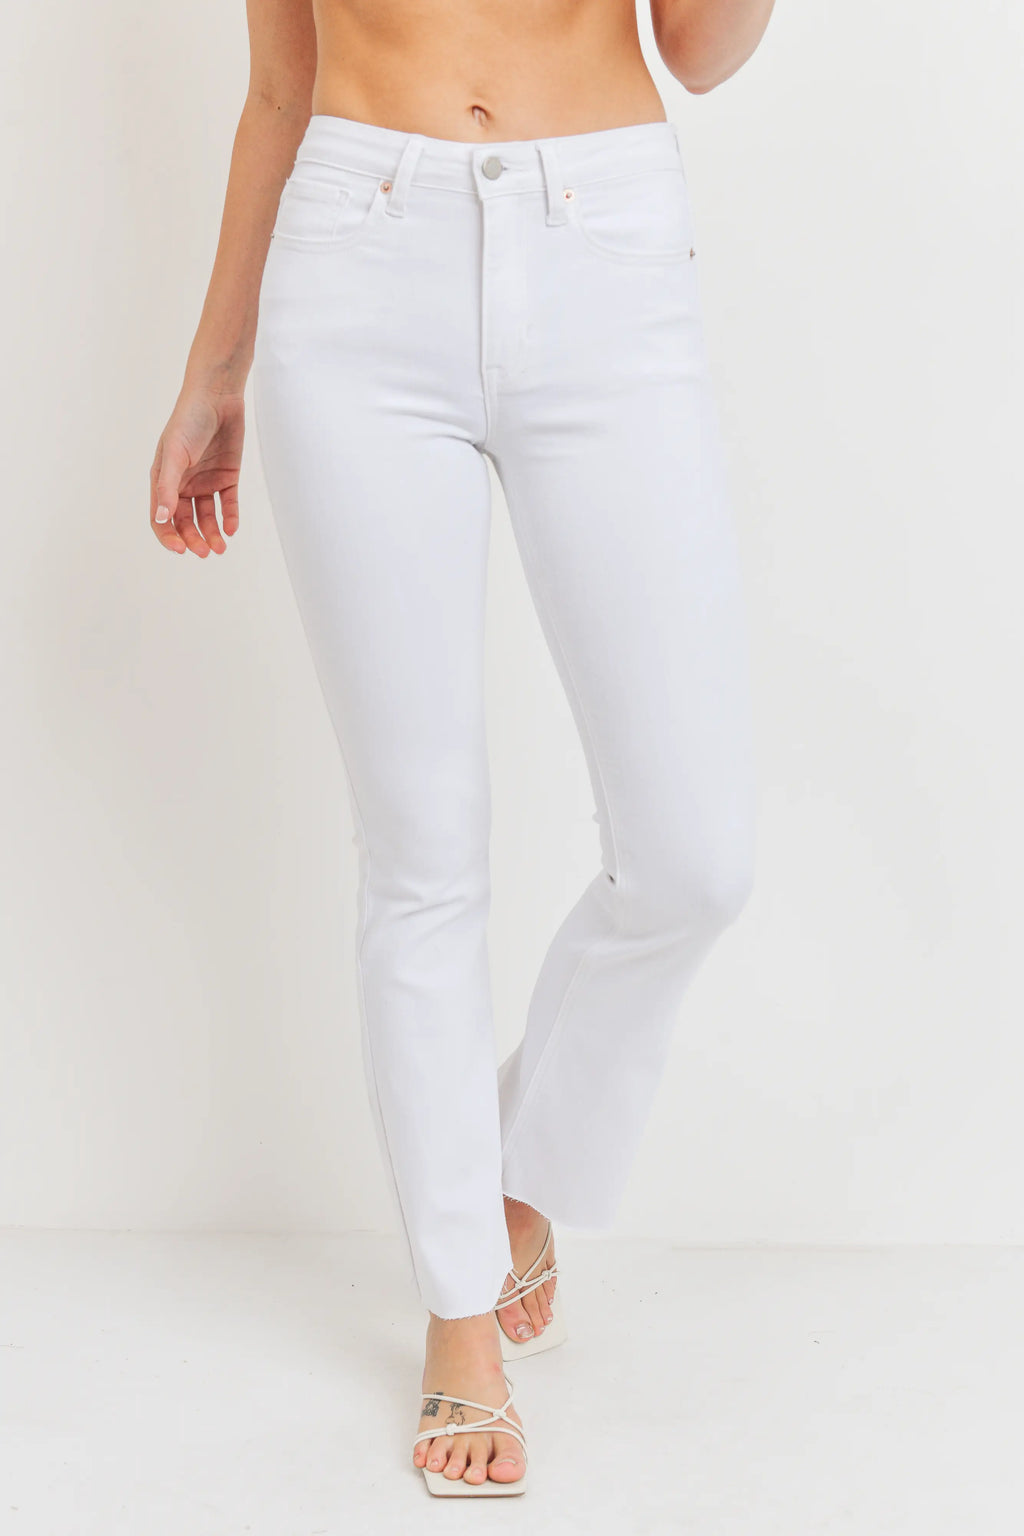 Buy White High Rise Distressed White Flare Jeans with Raw Hem